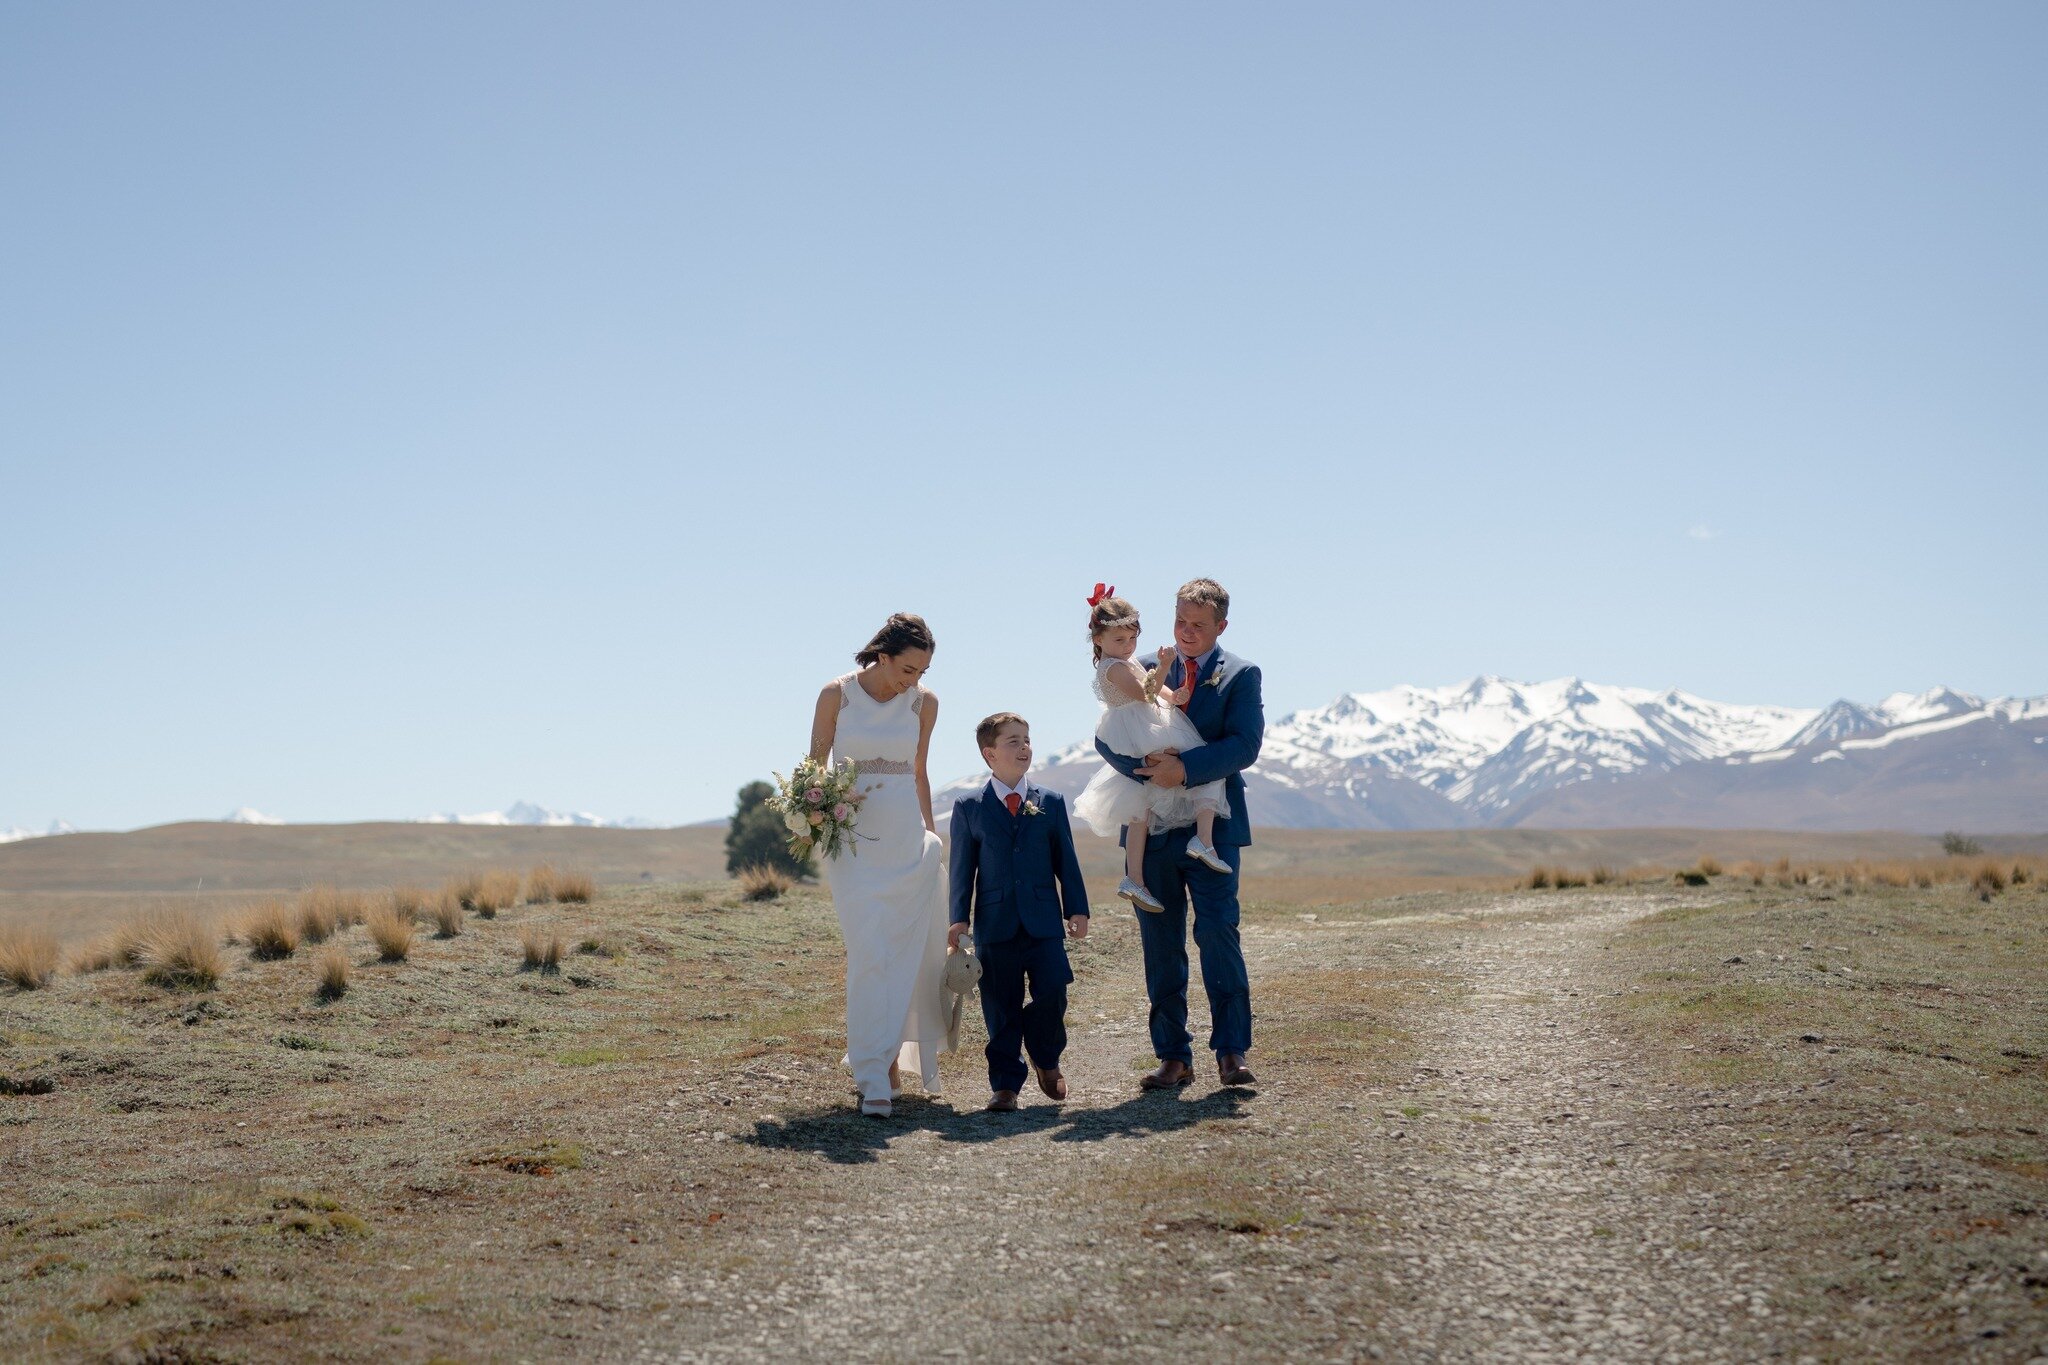 D &amp; M had an amazing day in Tekapo to celebrate their wedding with their two awesome kids! - It was truly spectacular weather all day long and I may have gotten a little sunburn. I cannot wait to deliver their final album!🍾🍾🍾 
.
.
.
#newzealan